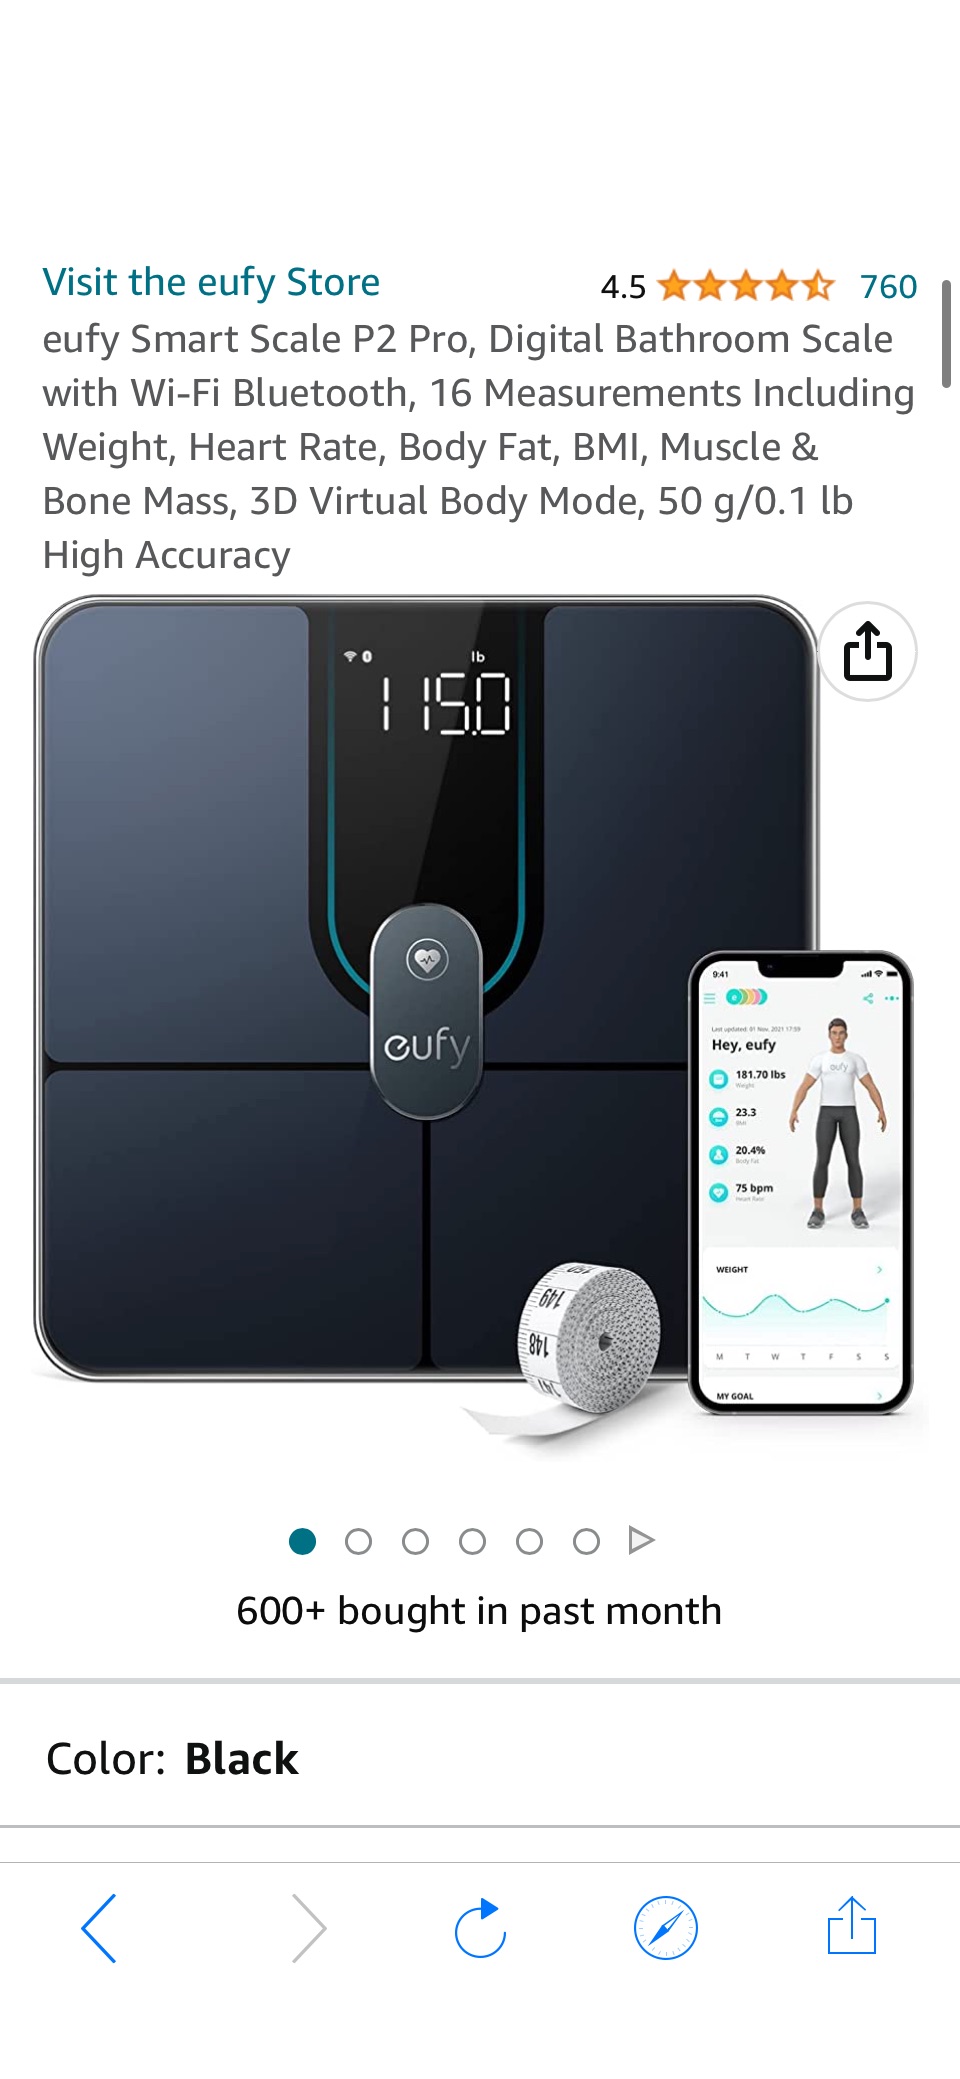 Amazon.com: eufy Smart Scale P2 Pro, Digital Bathroom Scale with Wi-Fi Bluetooth, 16 Measurements Including Weight, Heart Rate, Body Fat, BMI, Muscle & Bone Mass,原价79.99